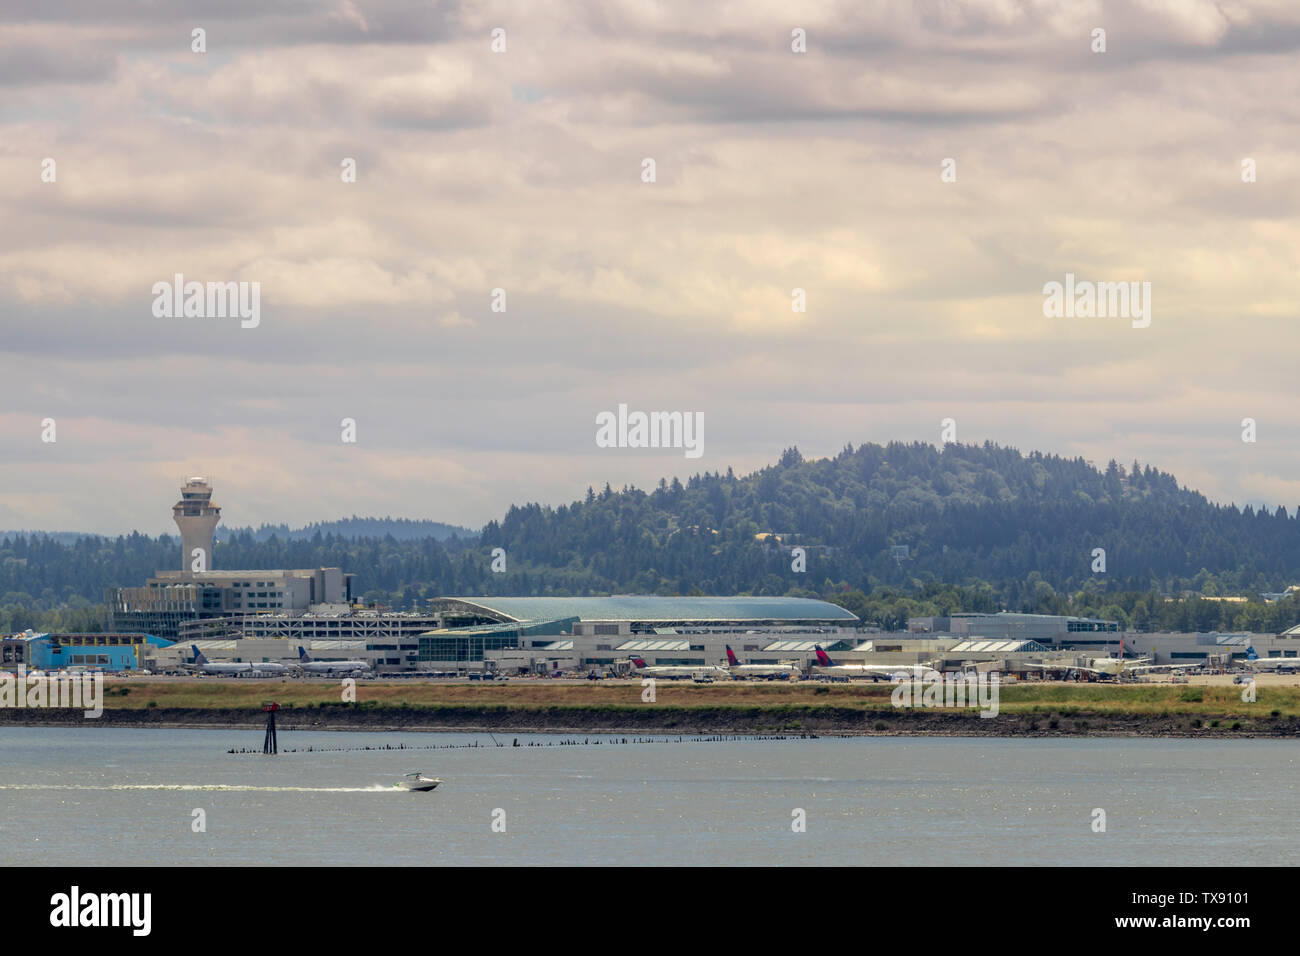 Portland, OR / USA - June 2019: View of concourse D and E with Air Traffic Control (ATC) tower at Portland International Airport (PDX) Stock Photo